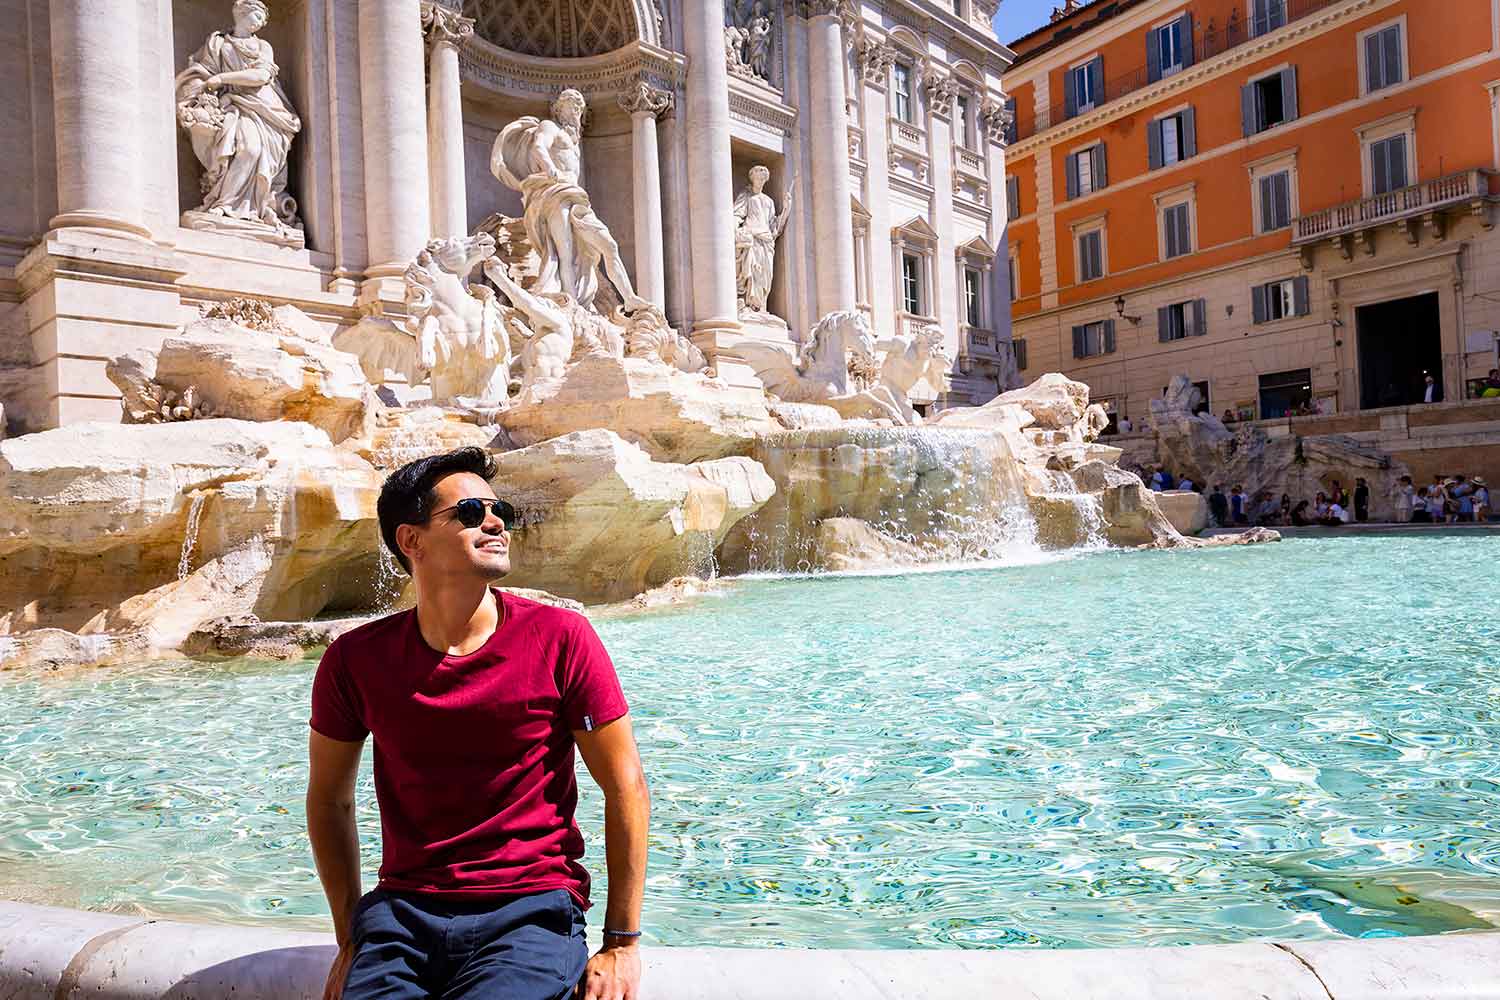 Sitting down portrait picture by the Trevi fountain Rome Italy. With crystal azure water all around